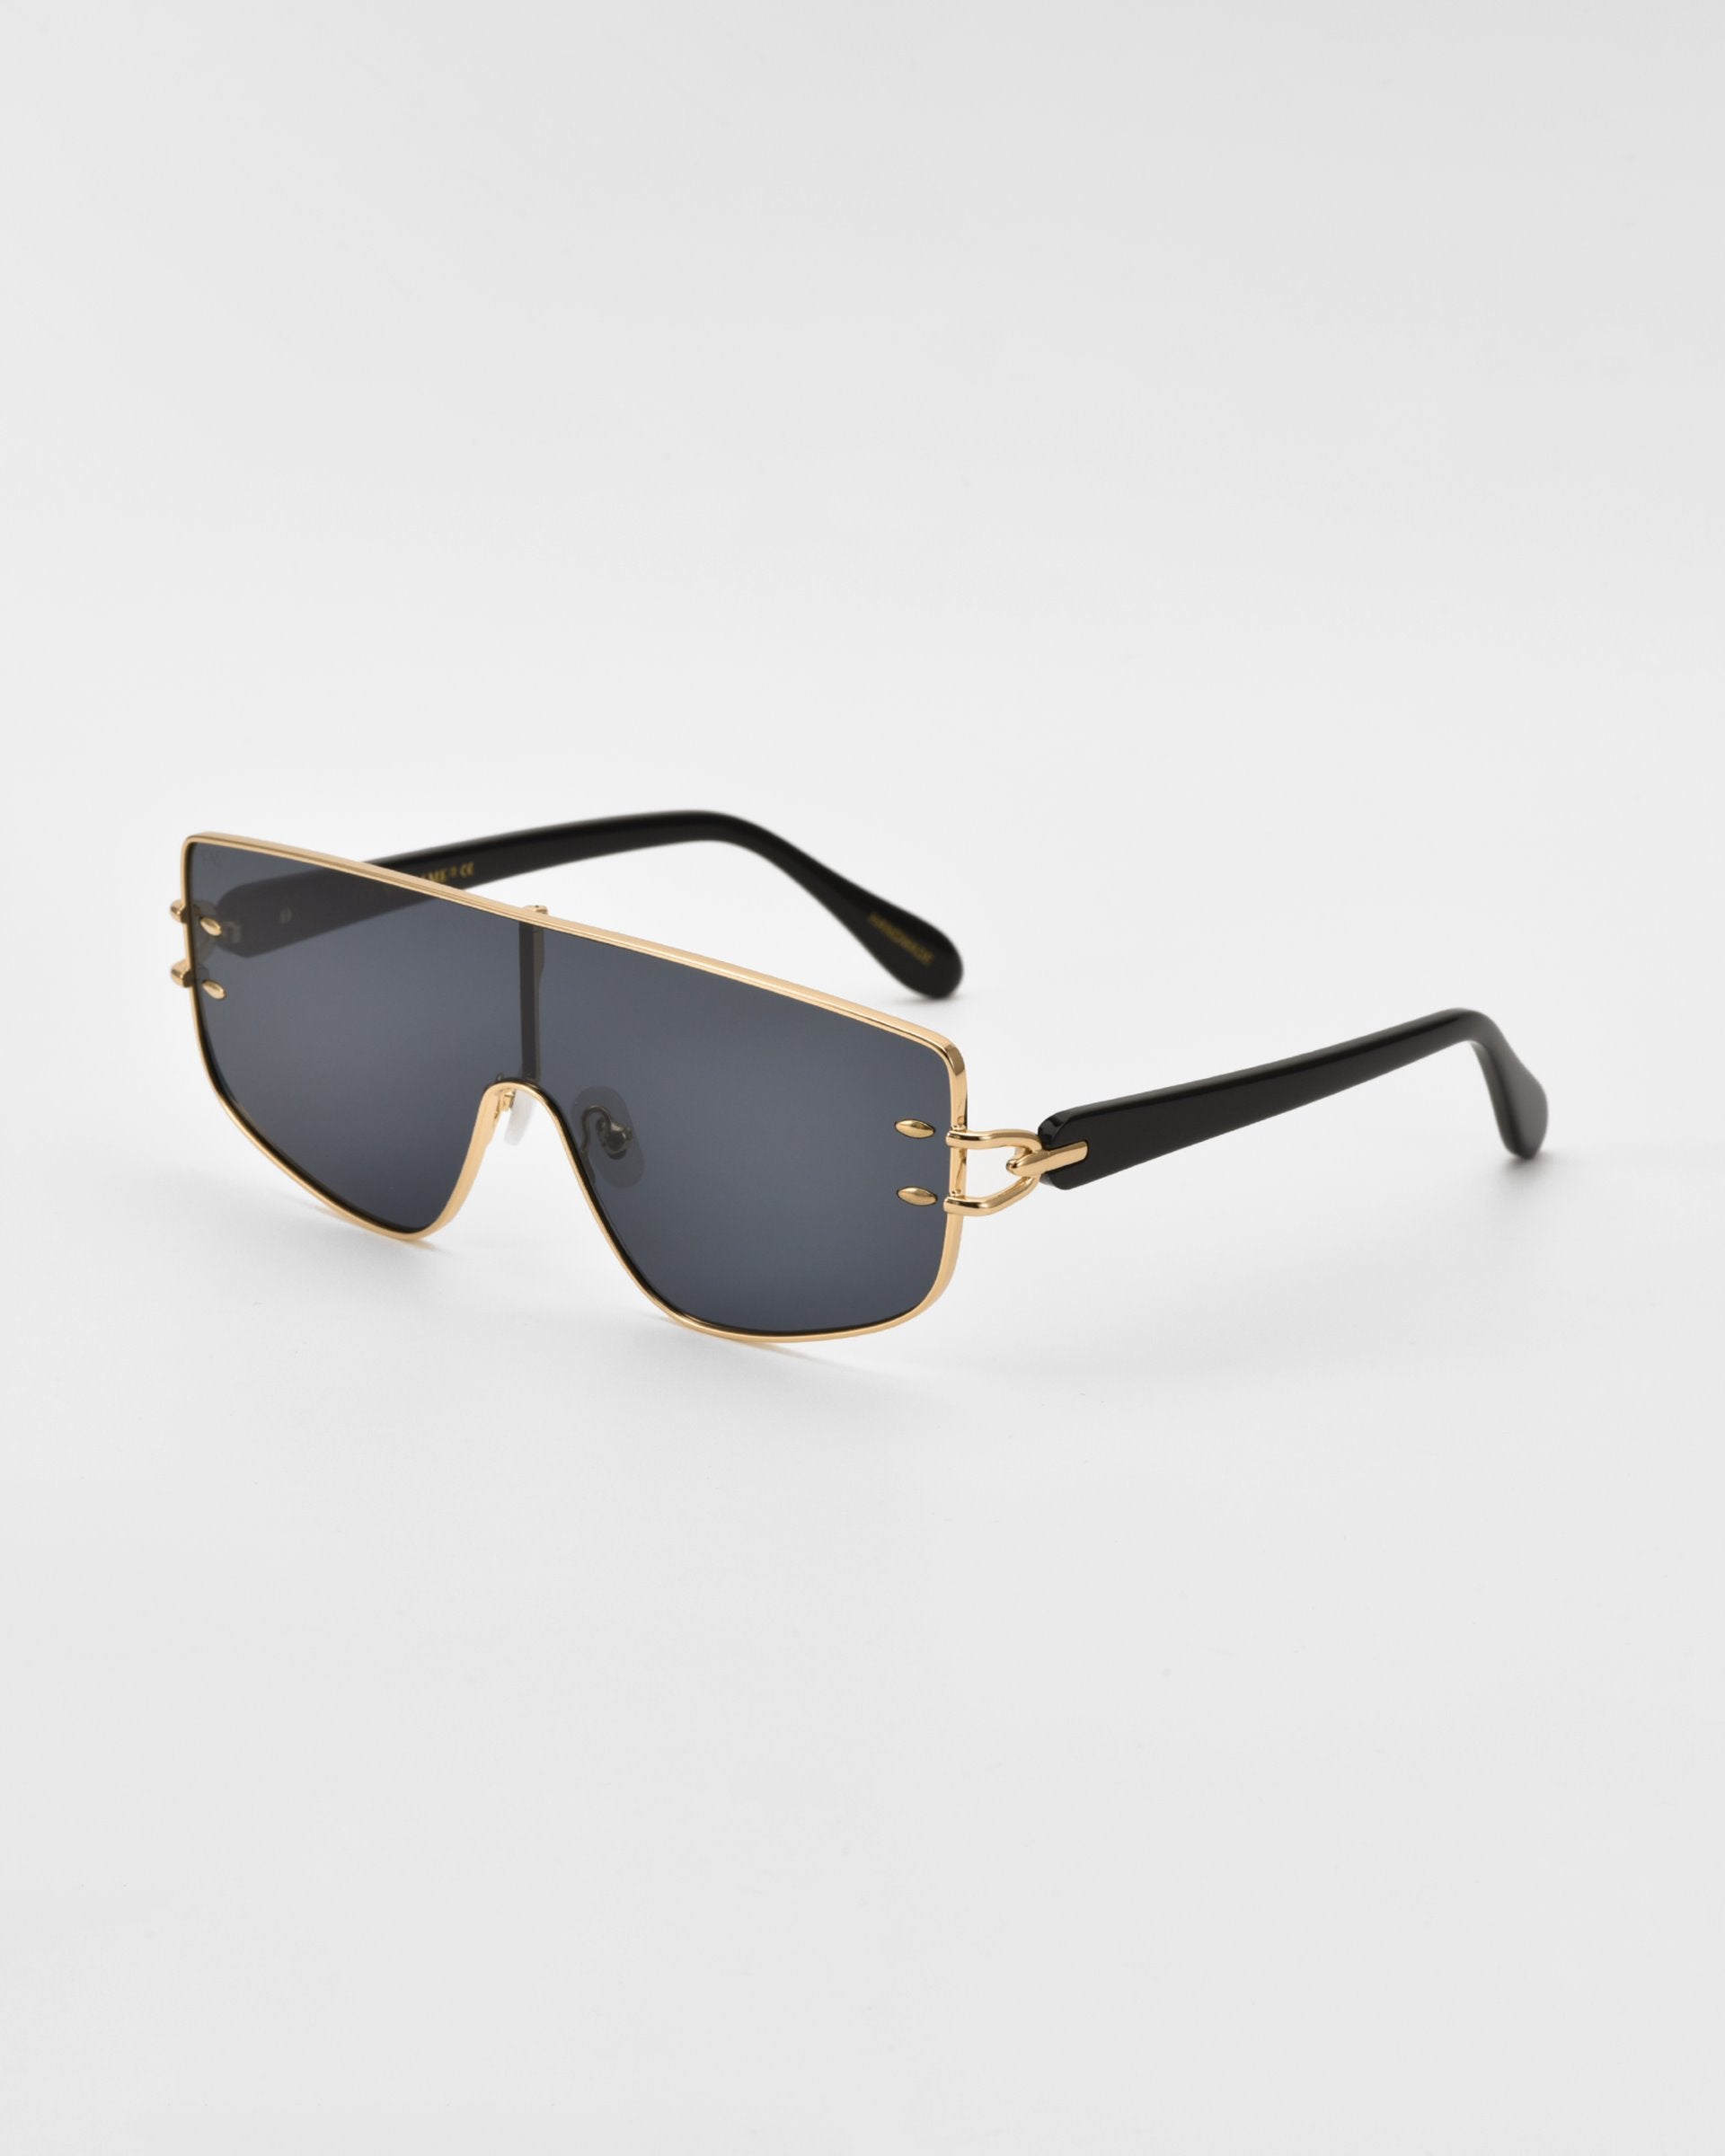 For Art's Sake® Flare sunglasses with a black frame and gold accents, featuring large, dark lenses offer a touch of luxury eyewear. The arms are black with a noticeable gold hinge detail near the lenses, all set against a plain white background.